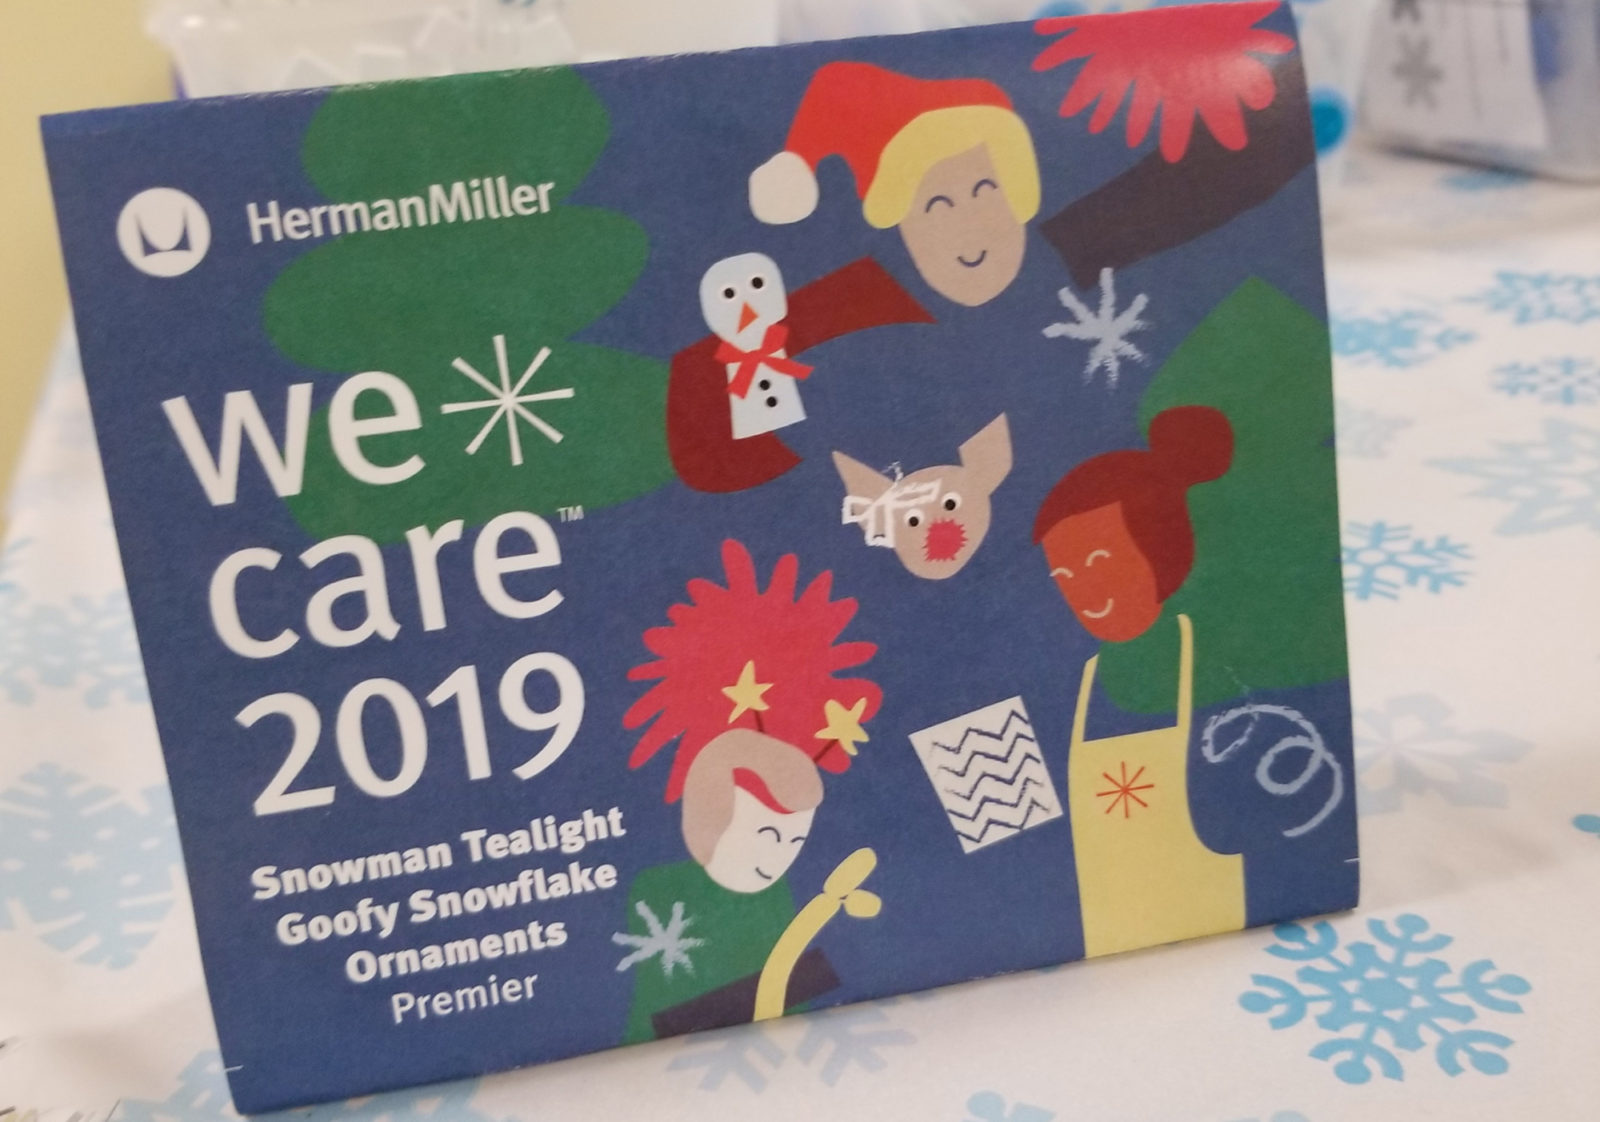 Post card for We Care 2019 event. The images are playful and colorful cartoons. There is also a list of crafts that Premier did at the event.